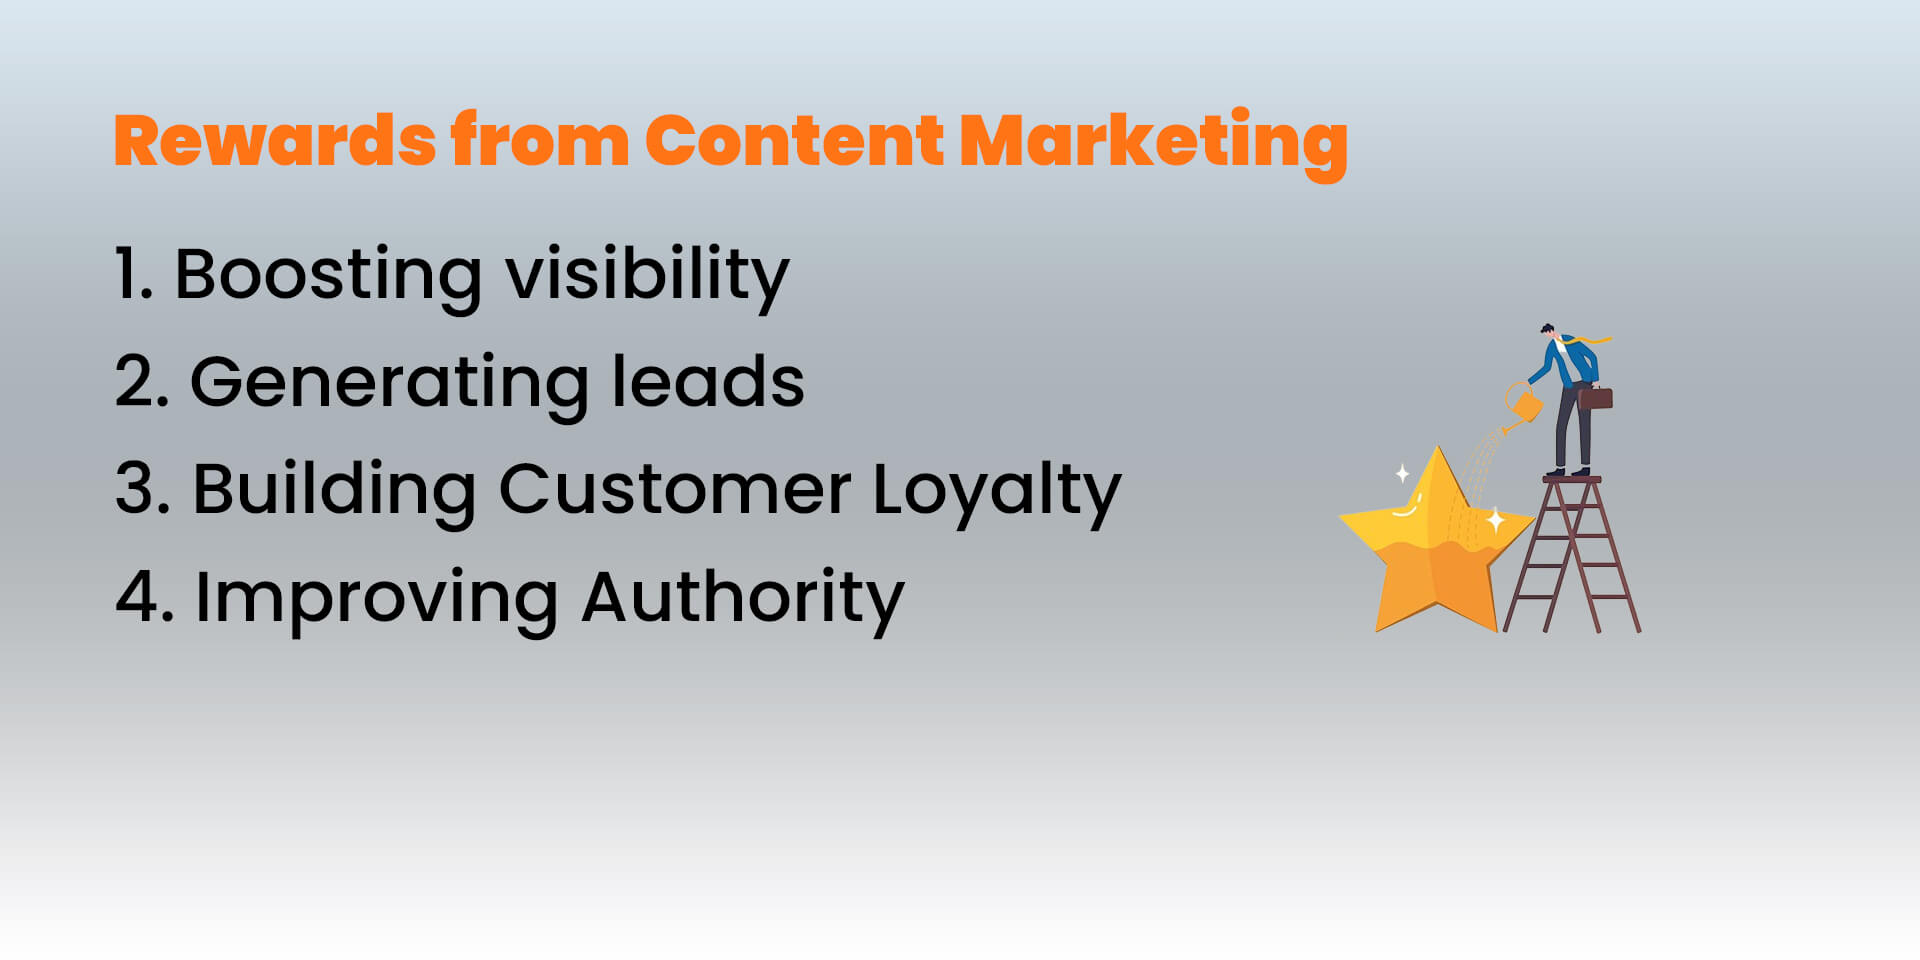 The benefits of content marketing